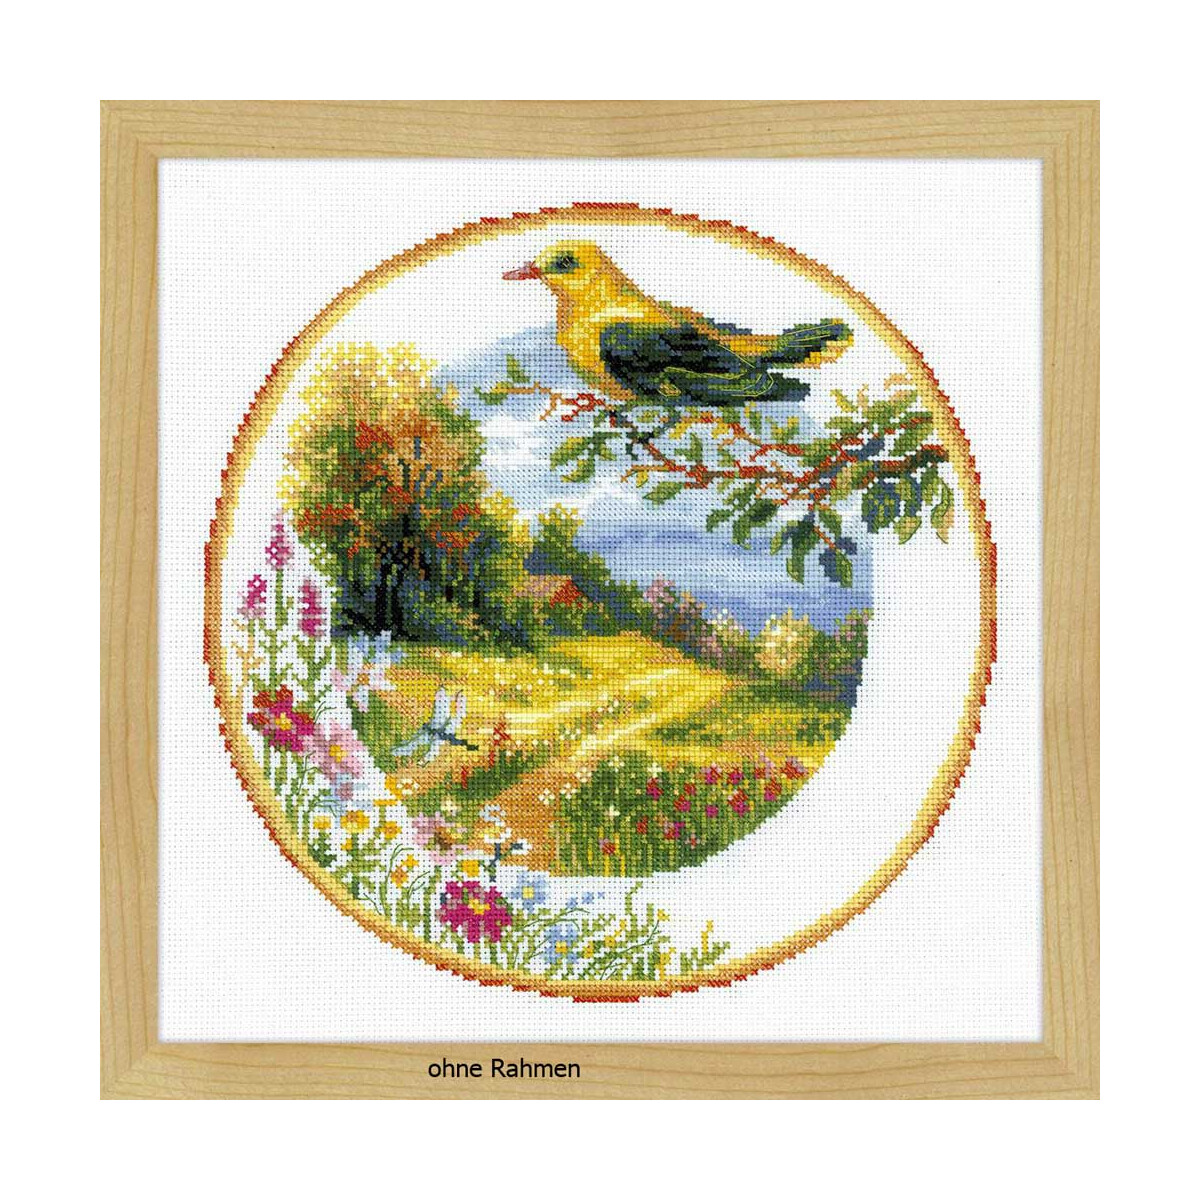 Riolis counted cross stitch Kit Plate with Oriole, DIY